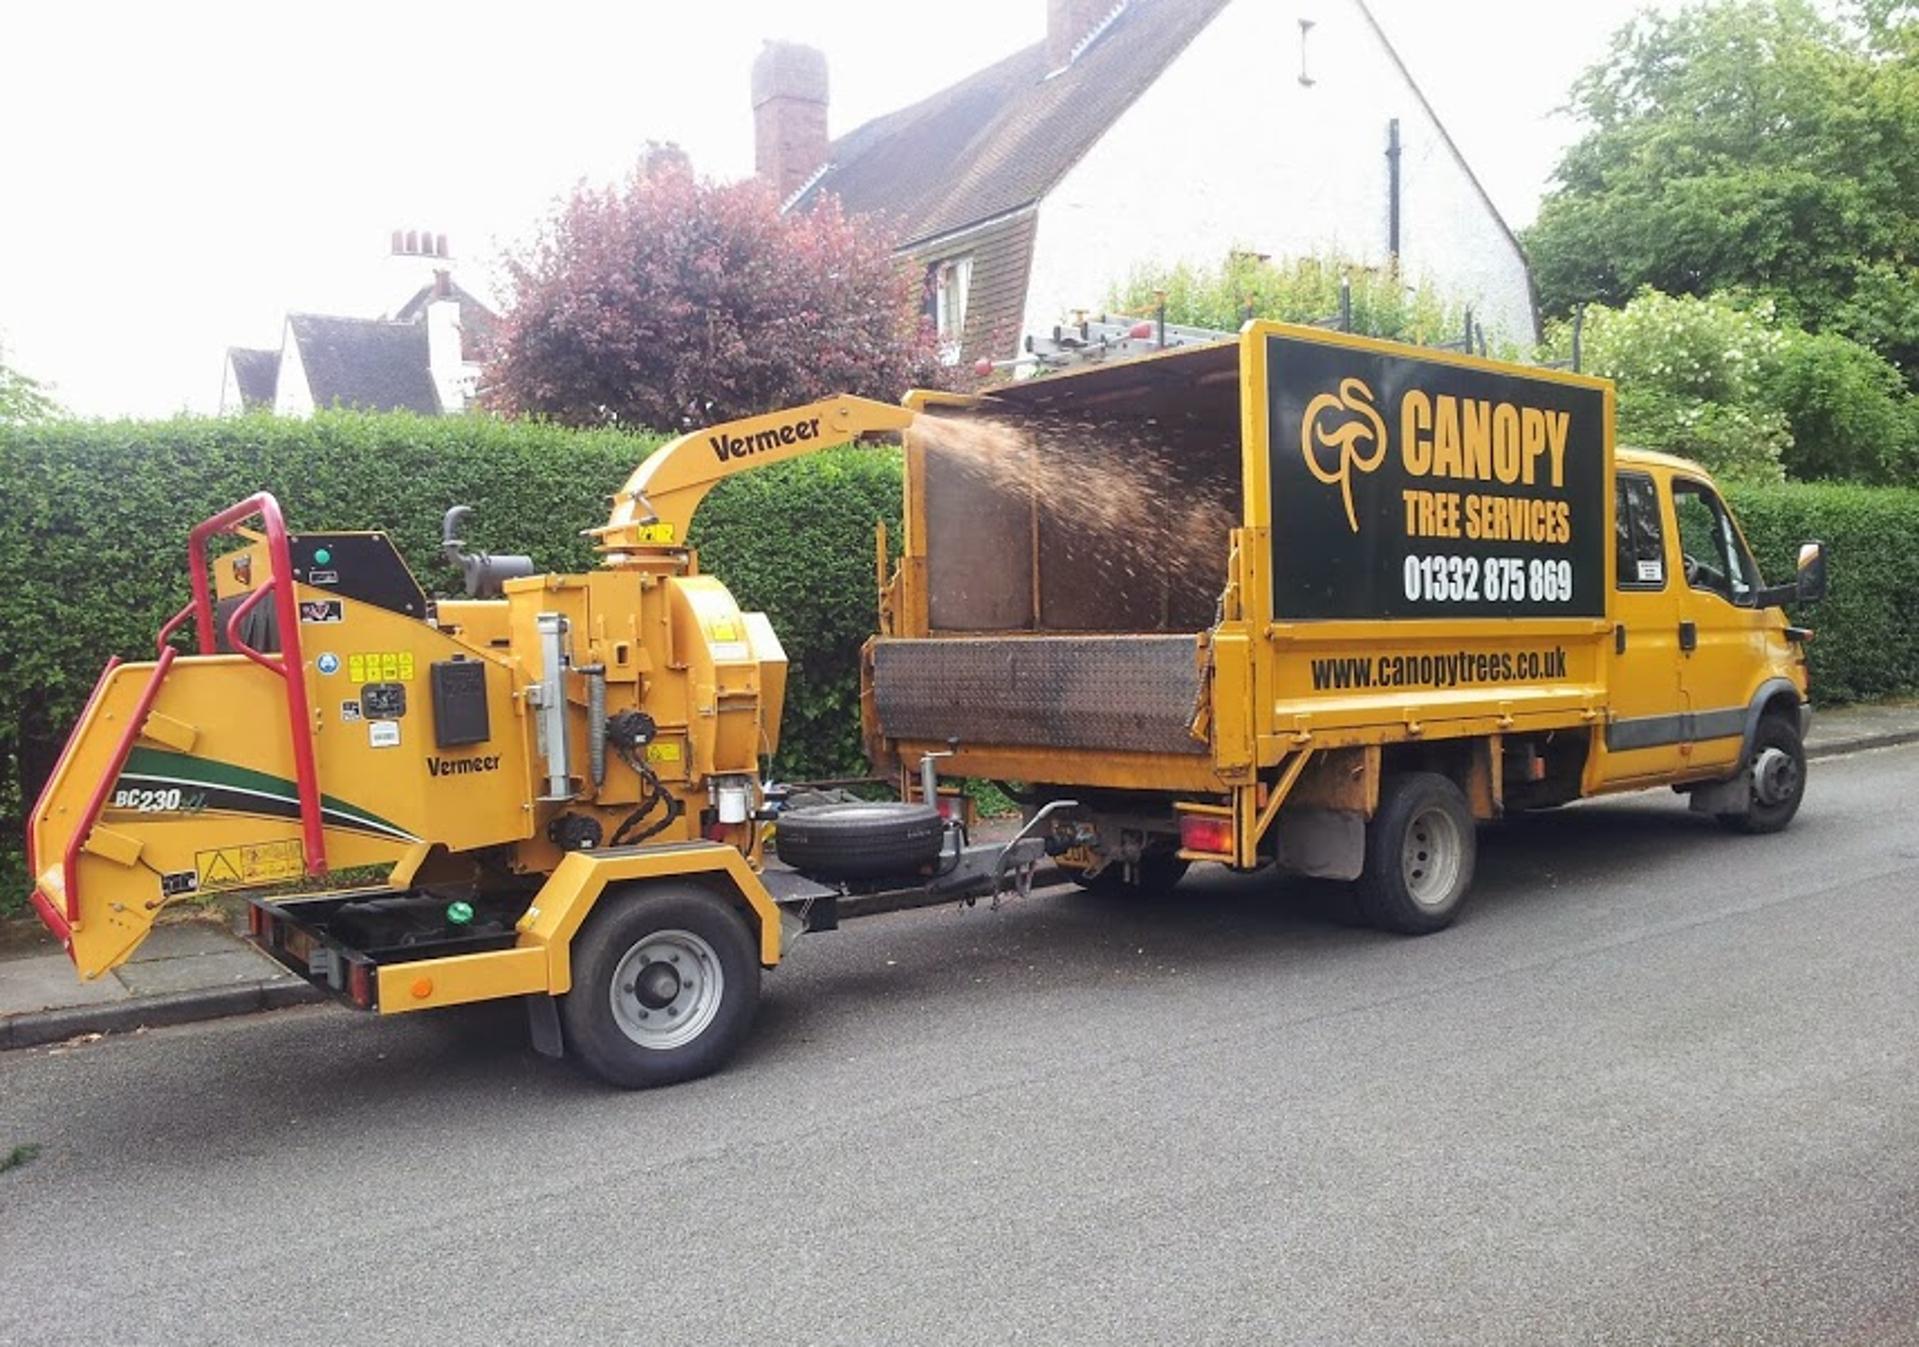 US group acquires East Midlands tree services firm